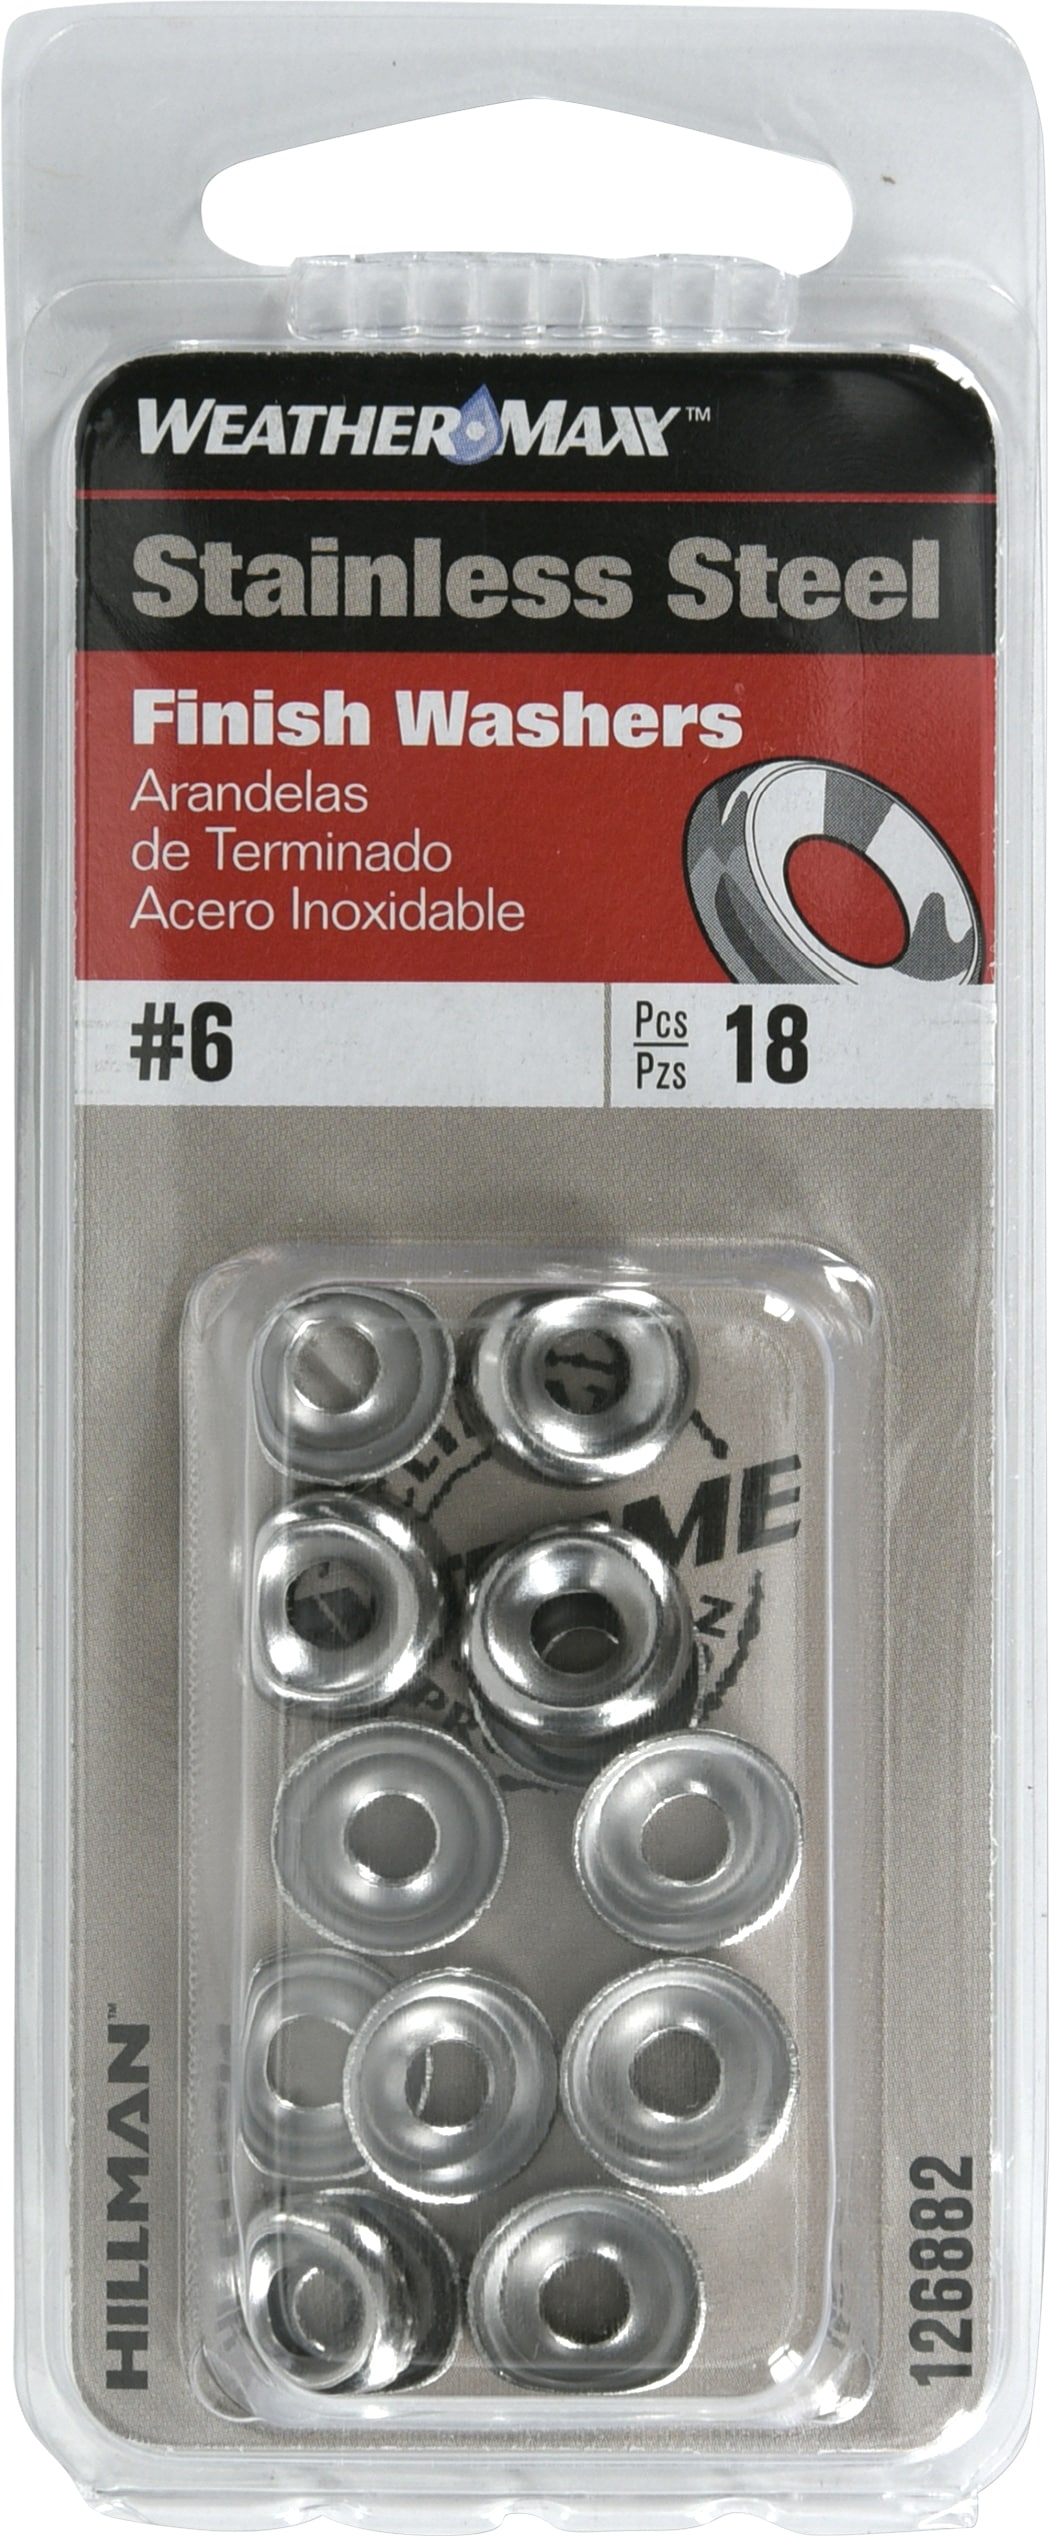 50-Pack The Hillman Group 42361 Stainless Steel Finish Washer 